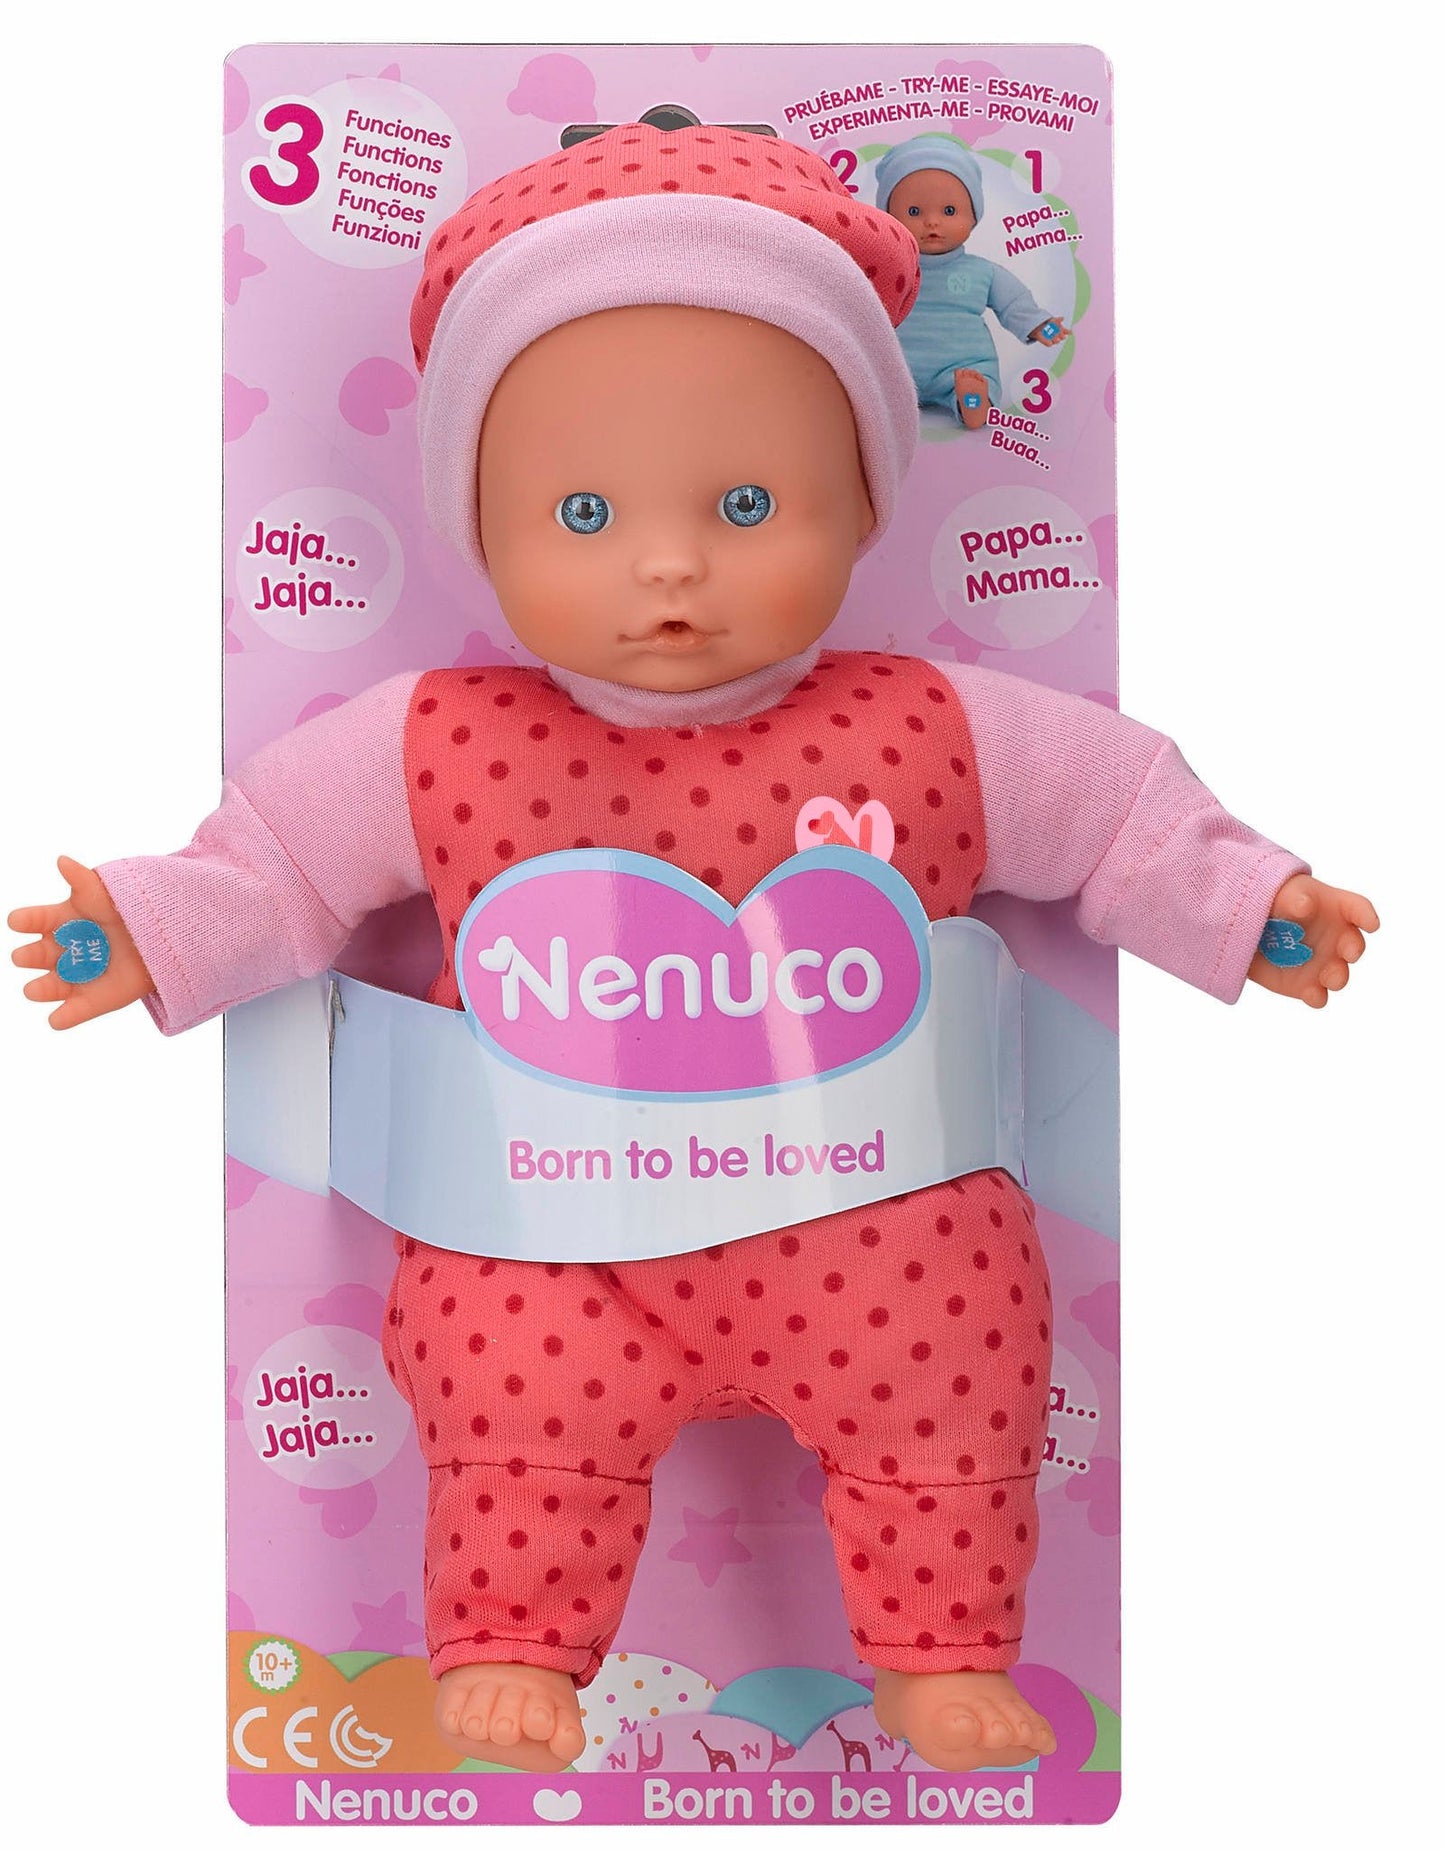 Nenuco Soft Baby Doll with 3 Real Life Functions